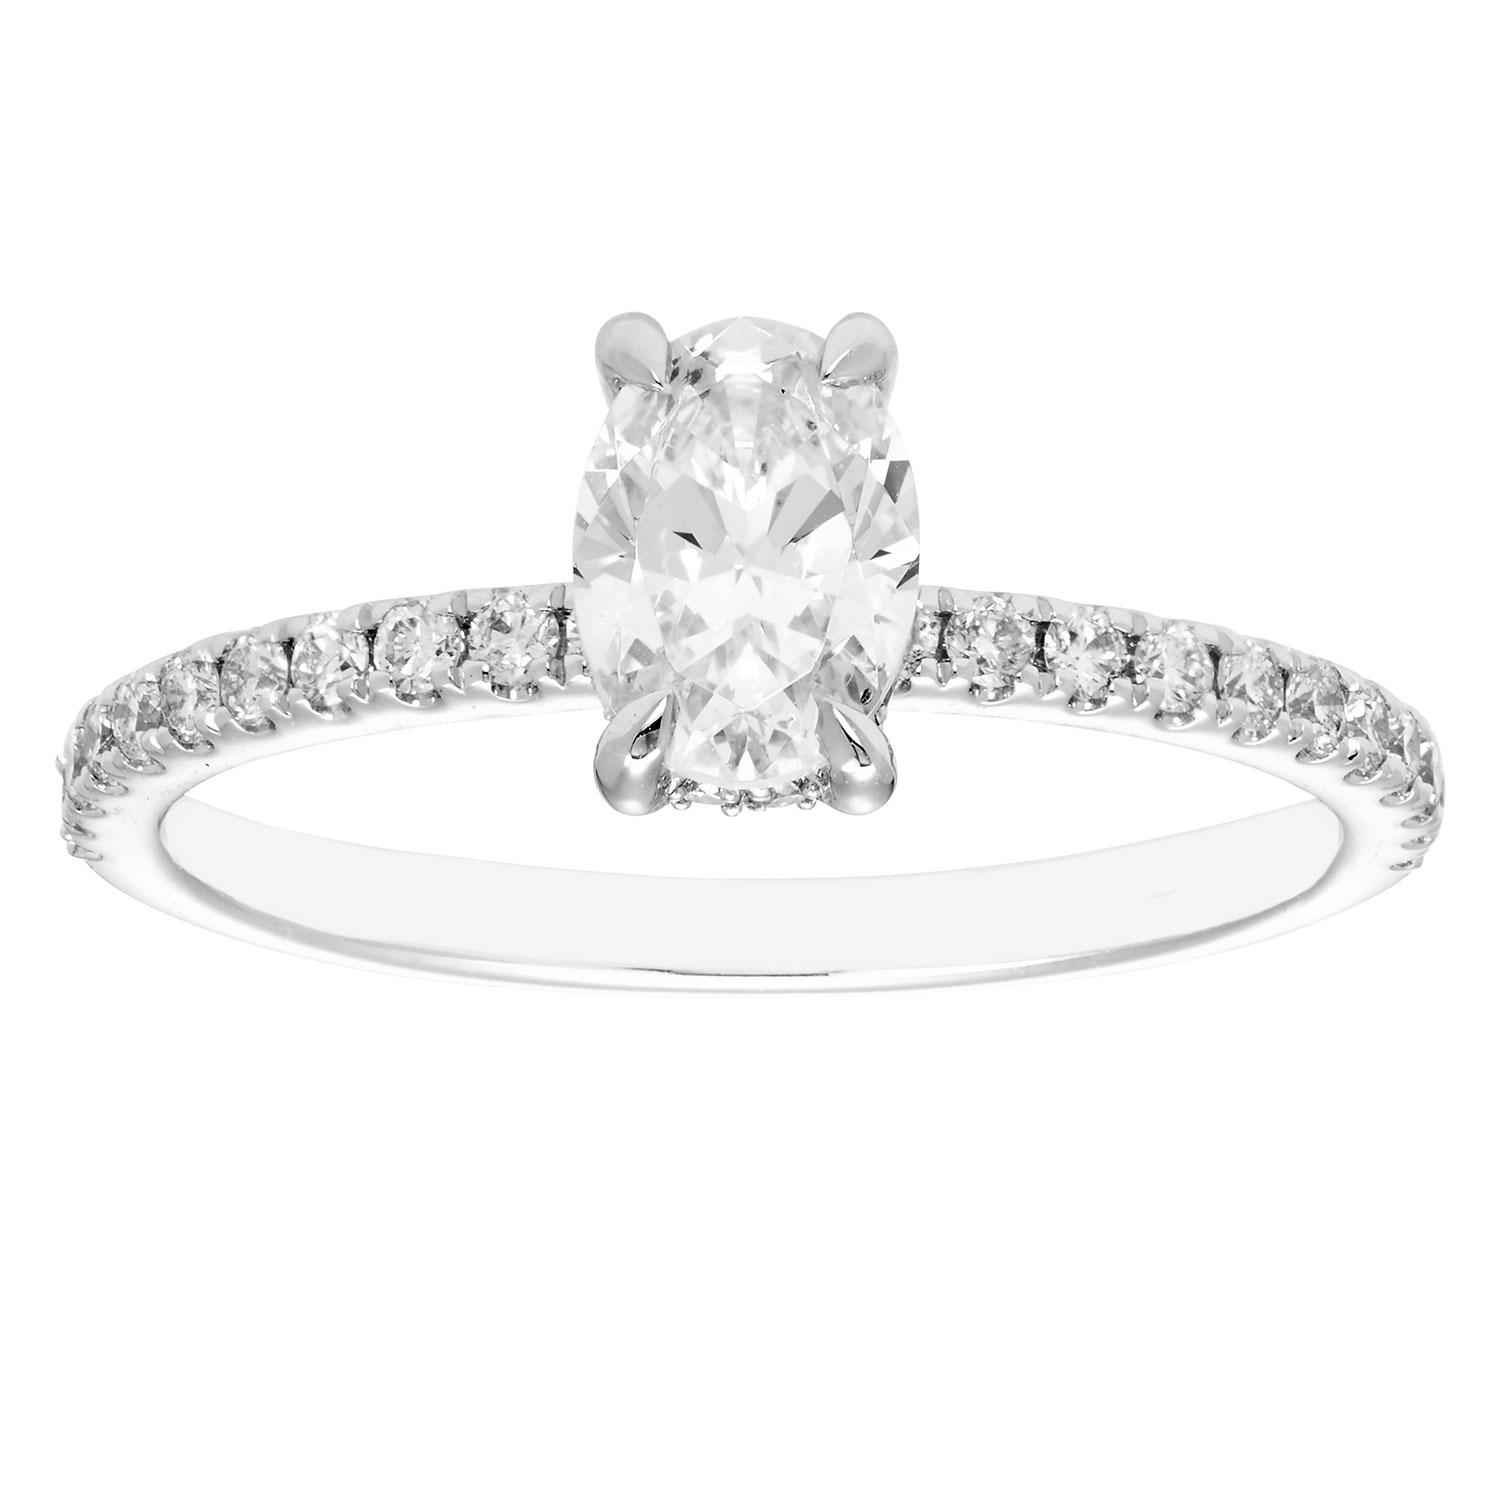 1.06 CT. T.W. Oval Diamond Engagement Ring in 14K White Gold, 7